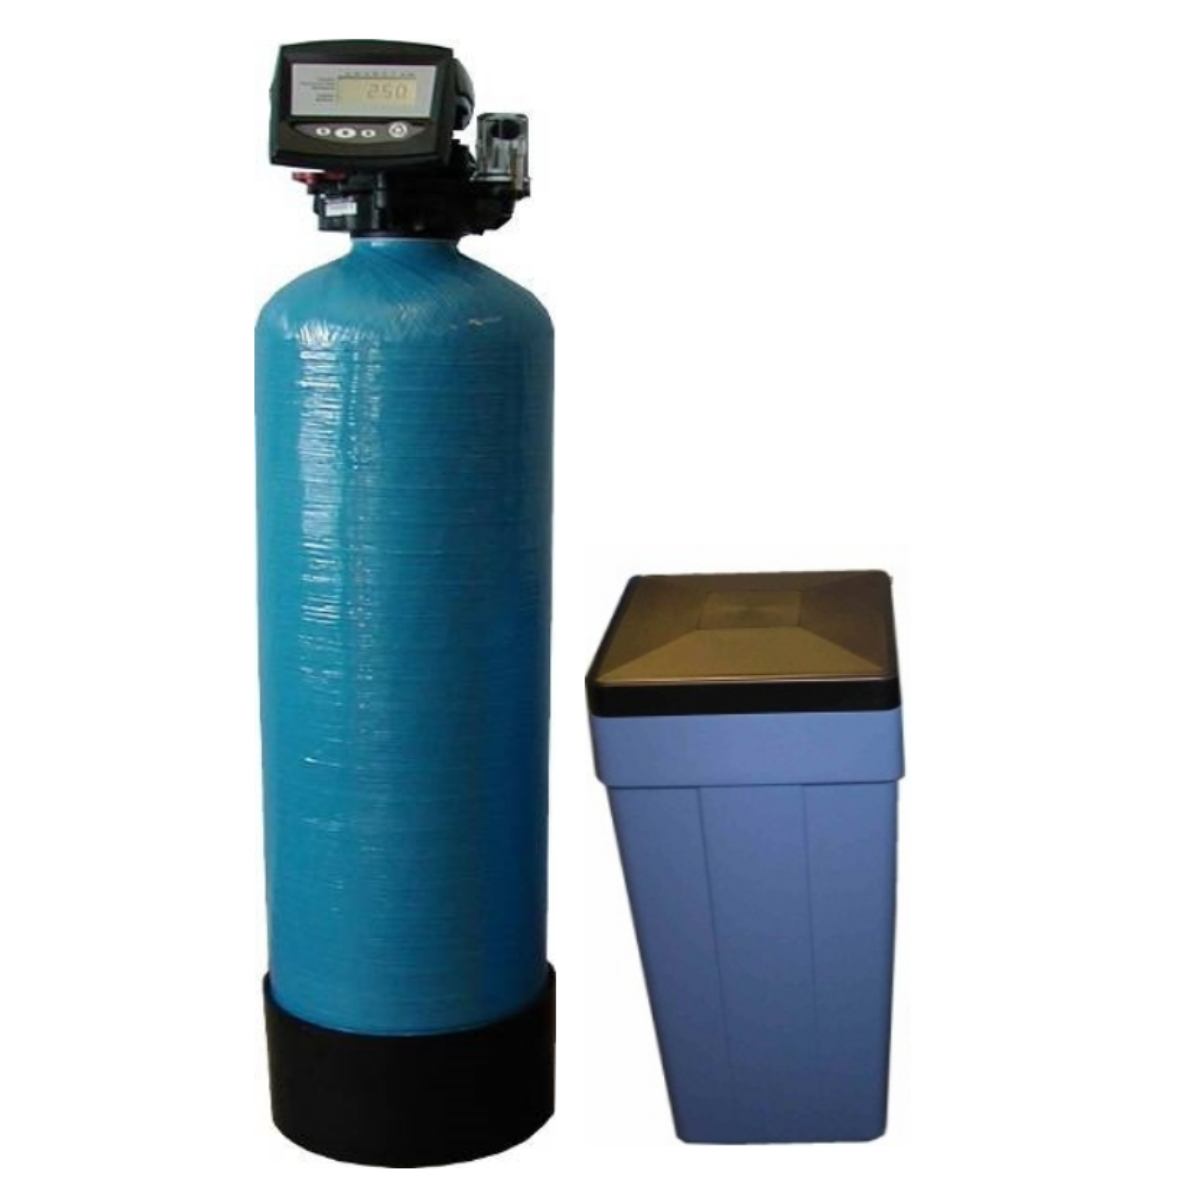 Simplex Autotrol 298 Time Based Controlled Commercial Water Softener 18" x 65", 200 Litres